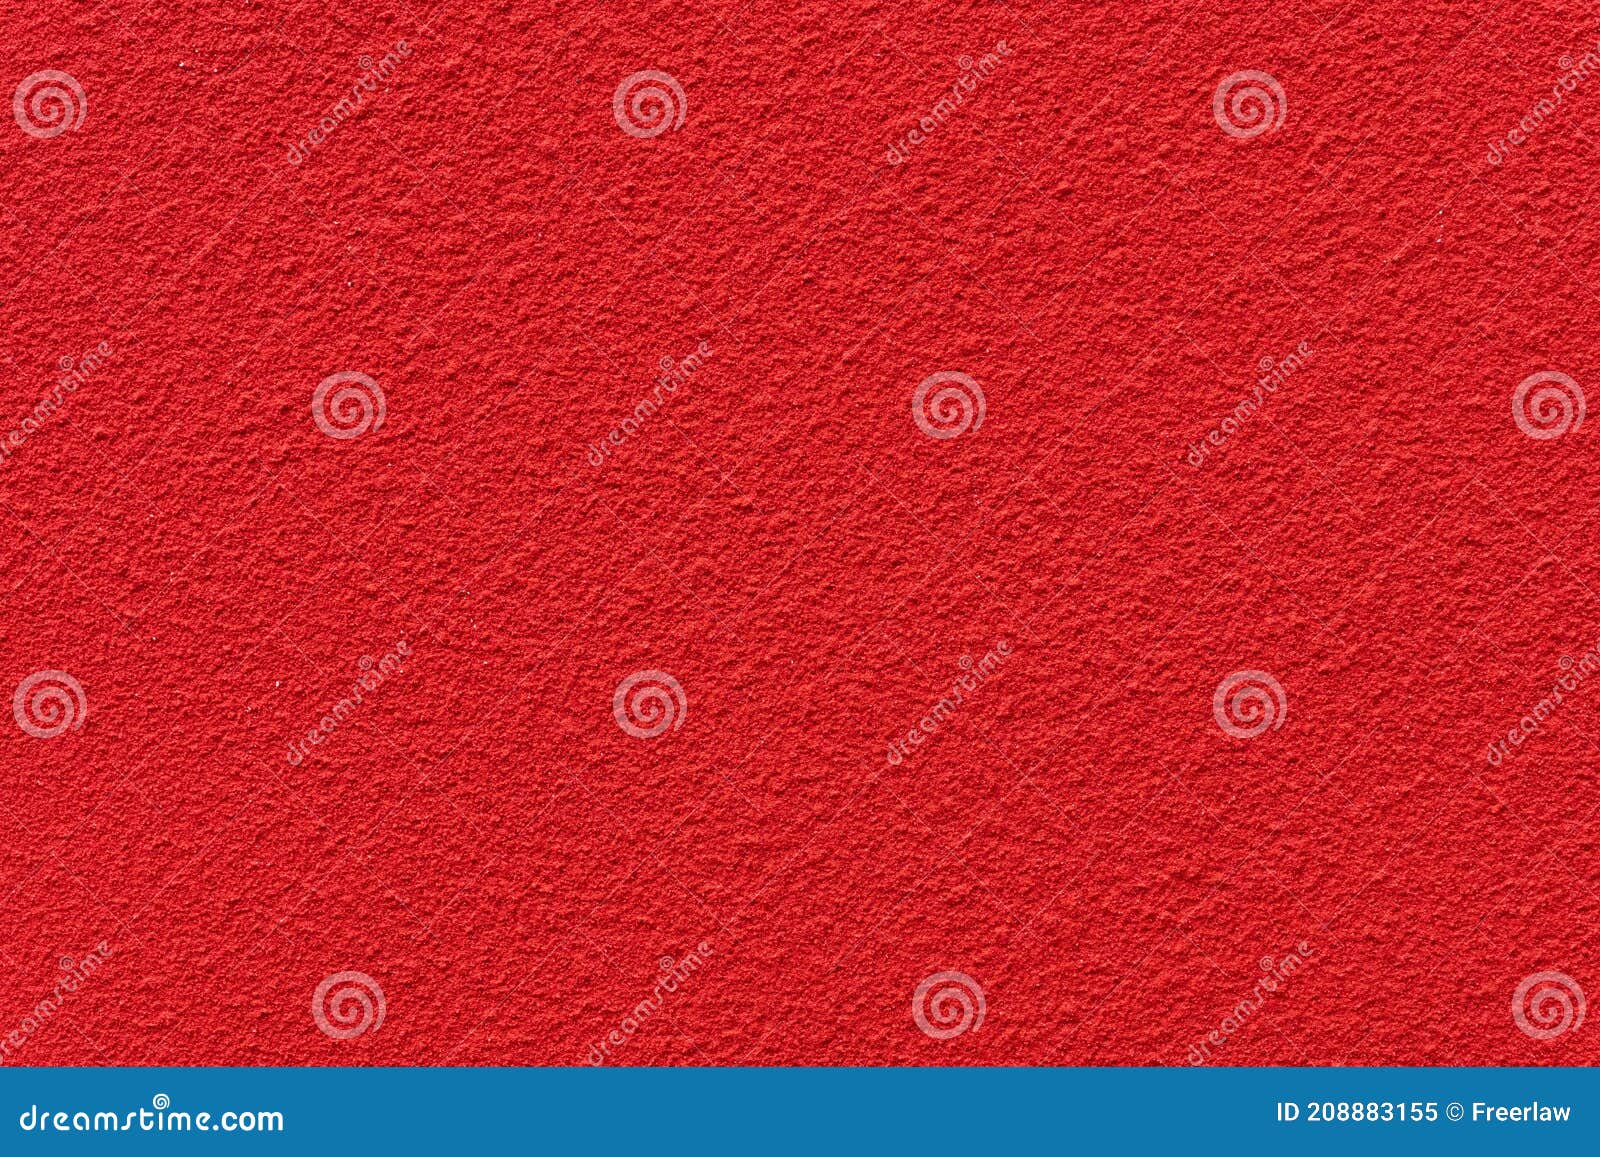 Red Rough Wall As Texture Background Stock Image Image Of Backdrop